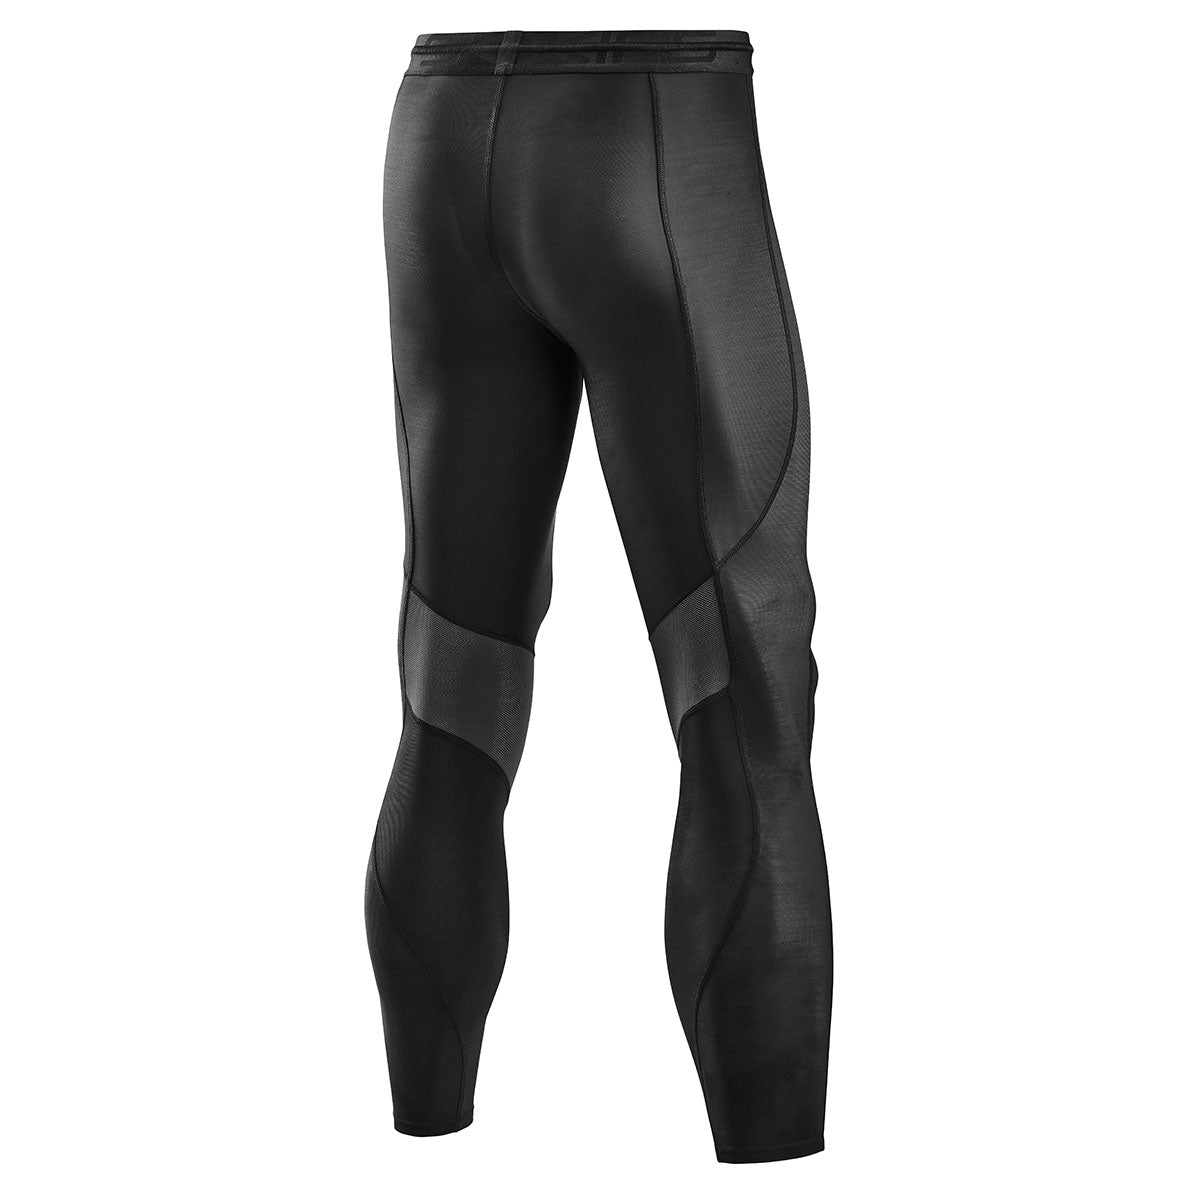 Skins Women's RY400 Compression Recovery Tights Dominican Republic